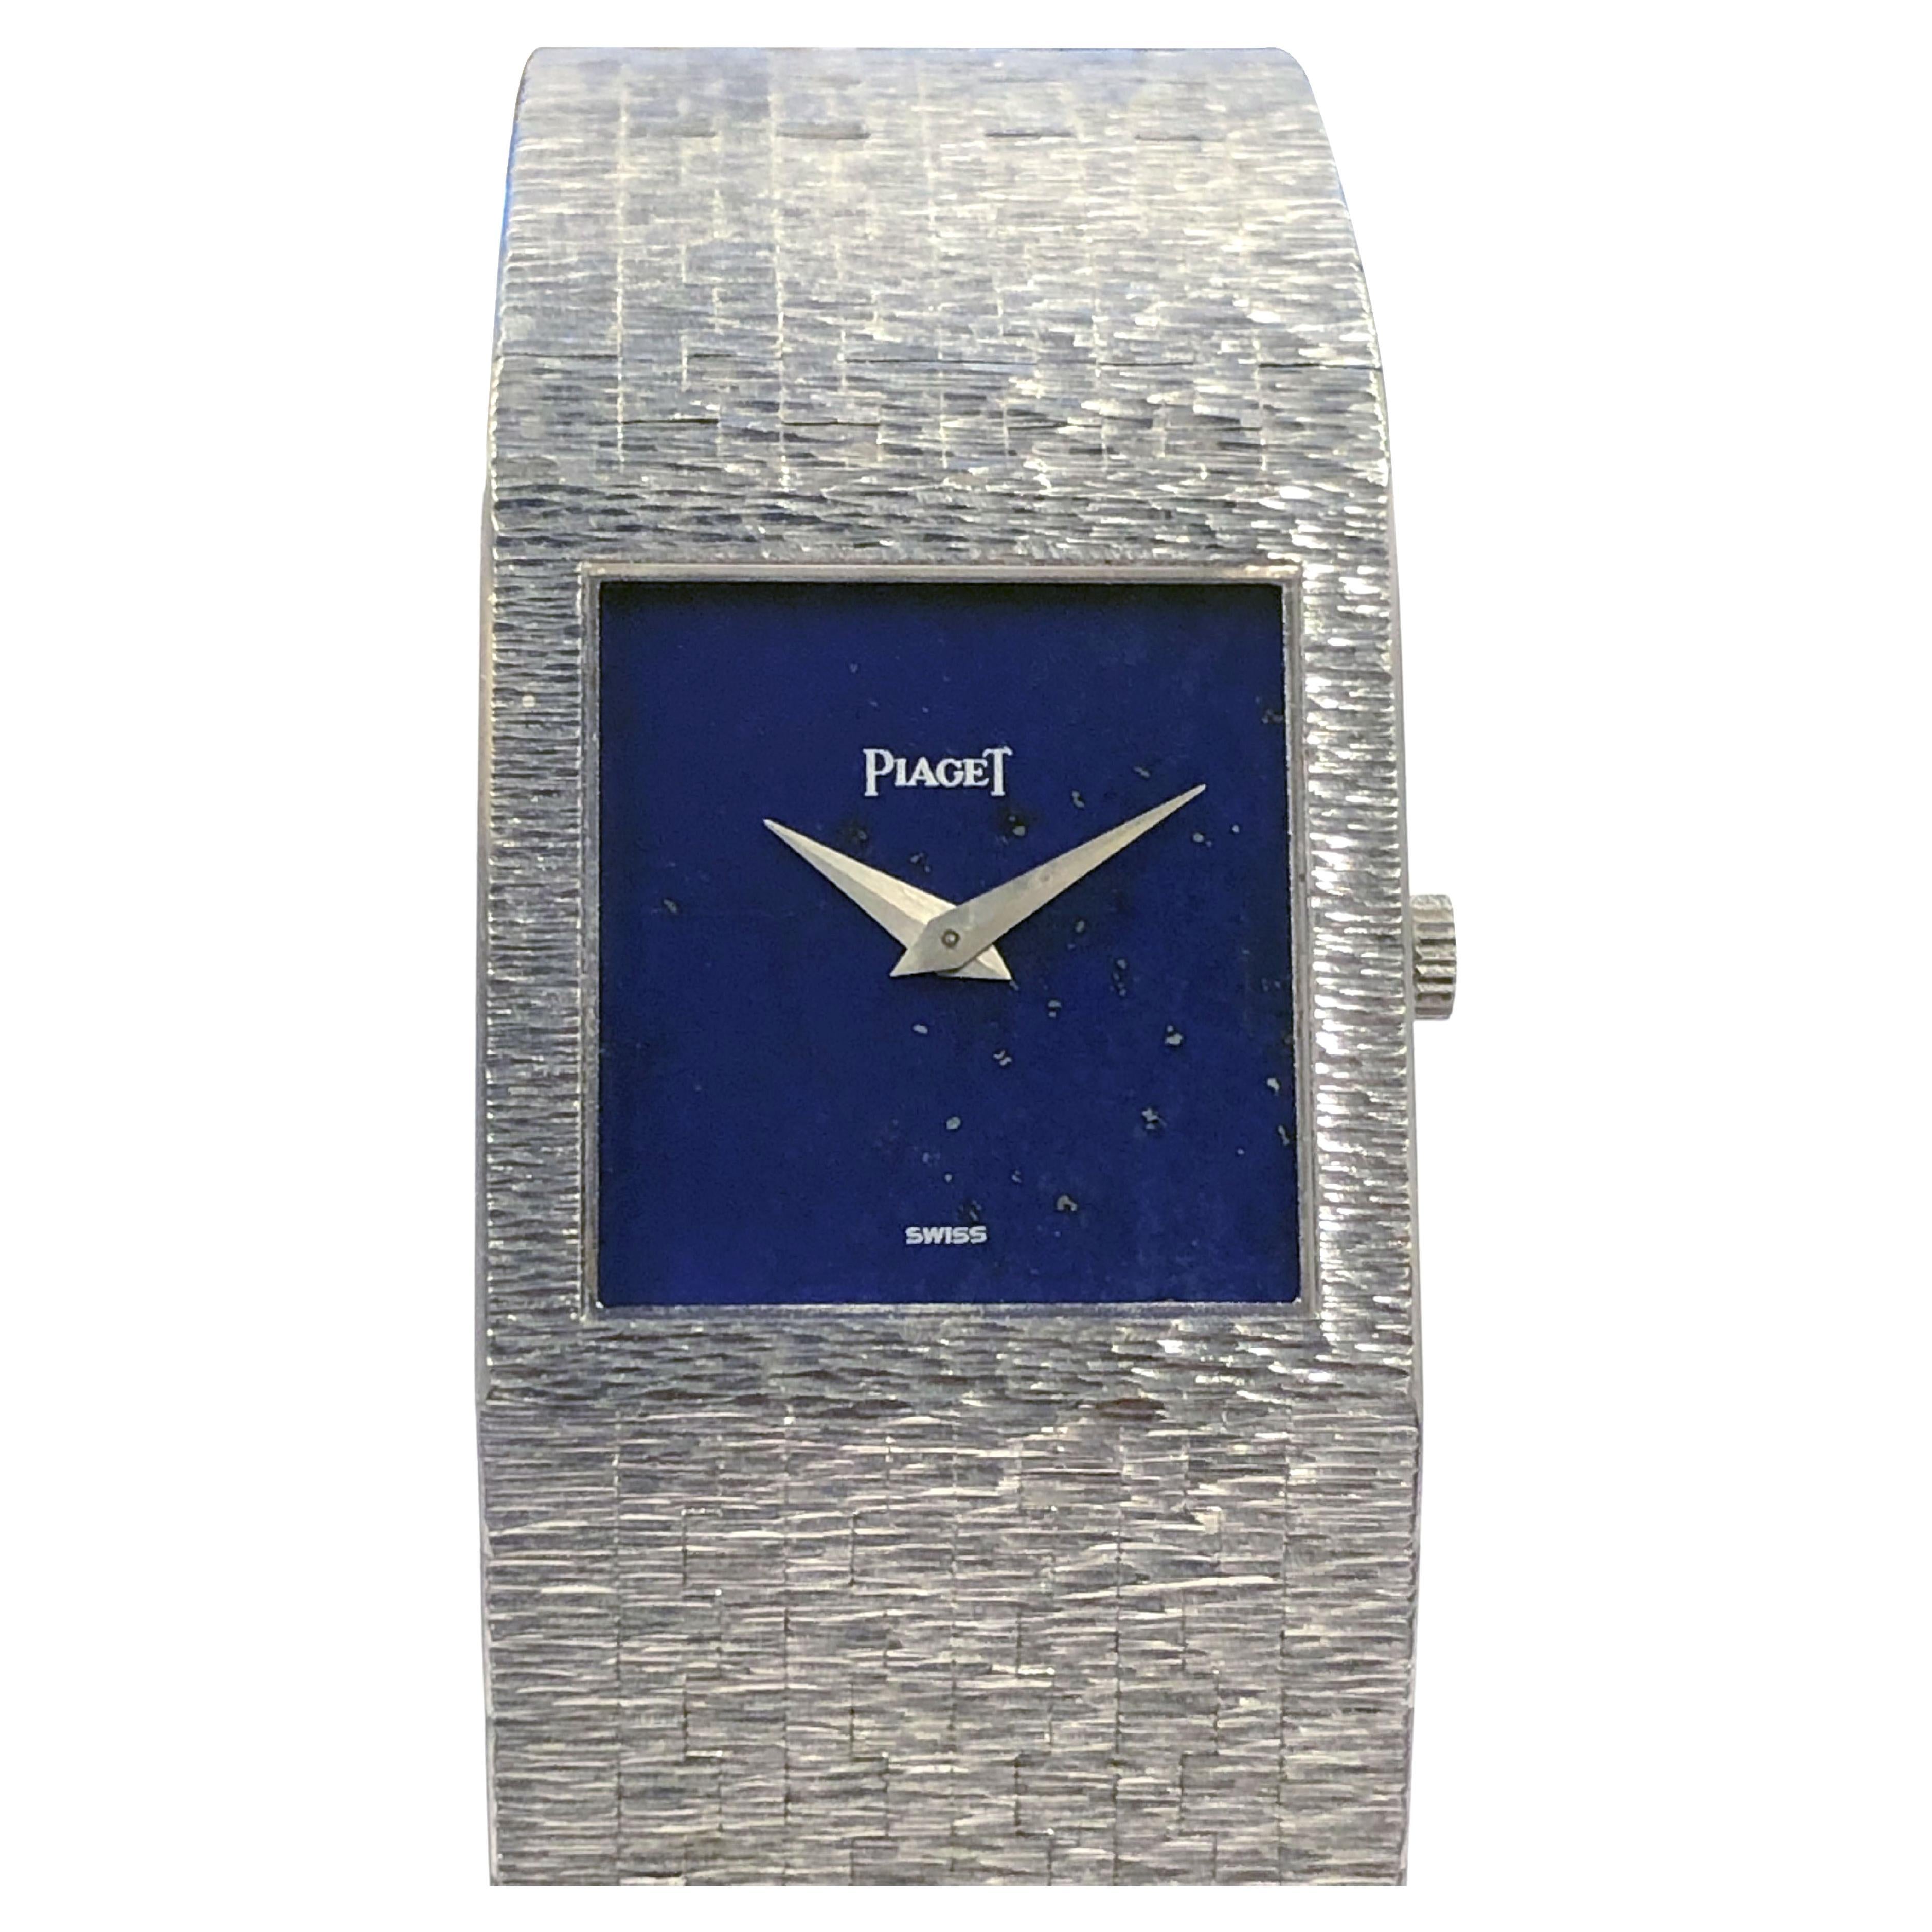 Piaget White Gold and Blue Lapis Dial Gents Wrist Watch